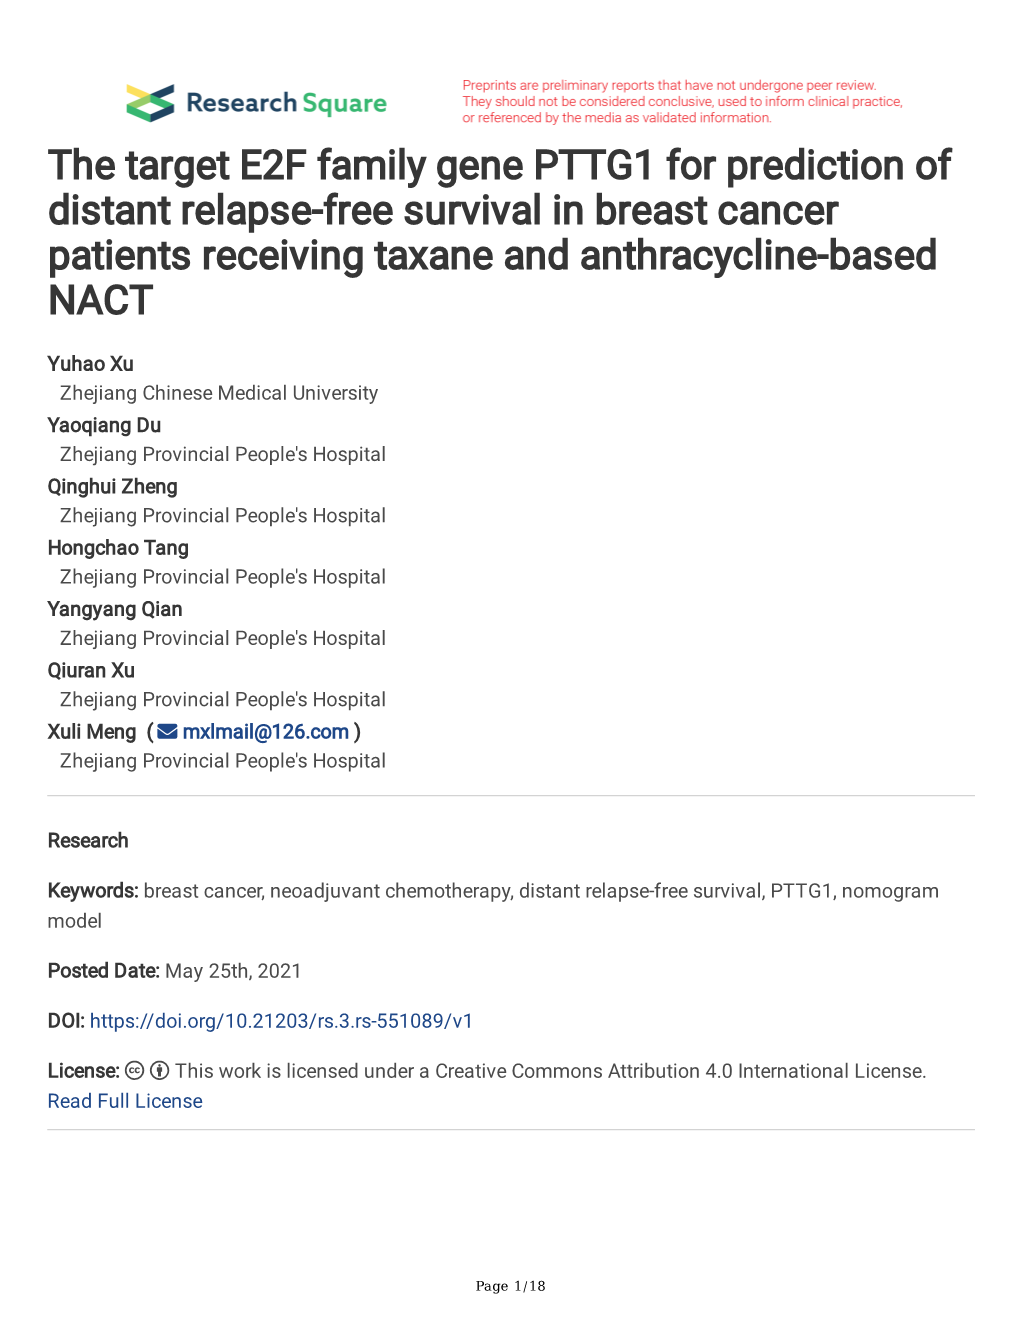 The Target E2F Family Gene PTTG1 for Prediction of Distant Relapse-Free Survival in Breast Cancer Patients Receiving Taxane and Anthracycline-Based NACT